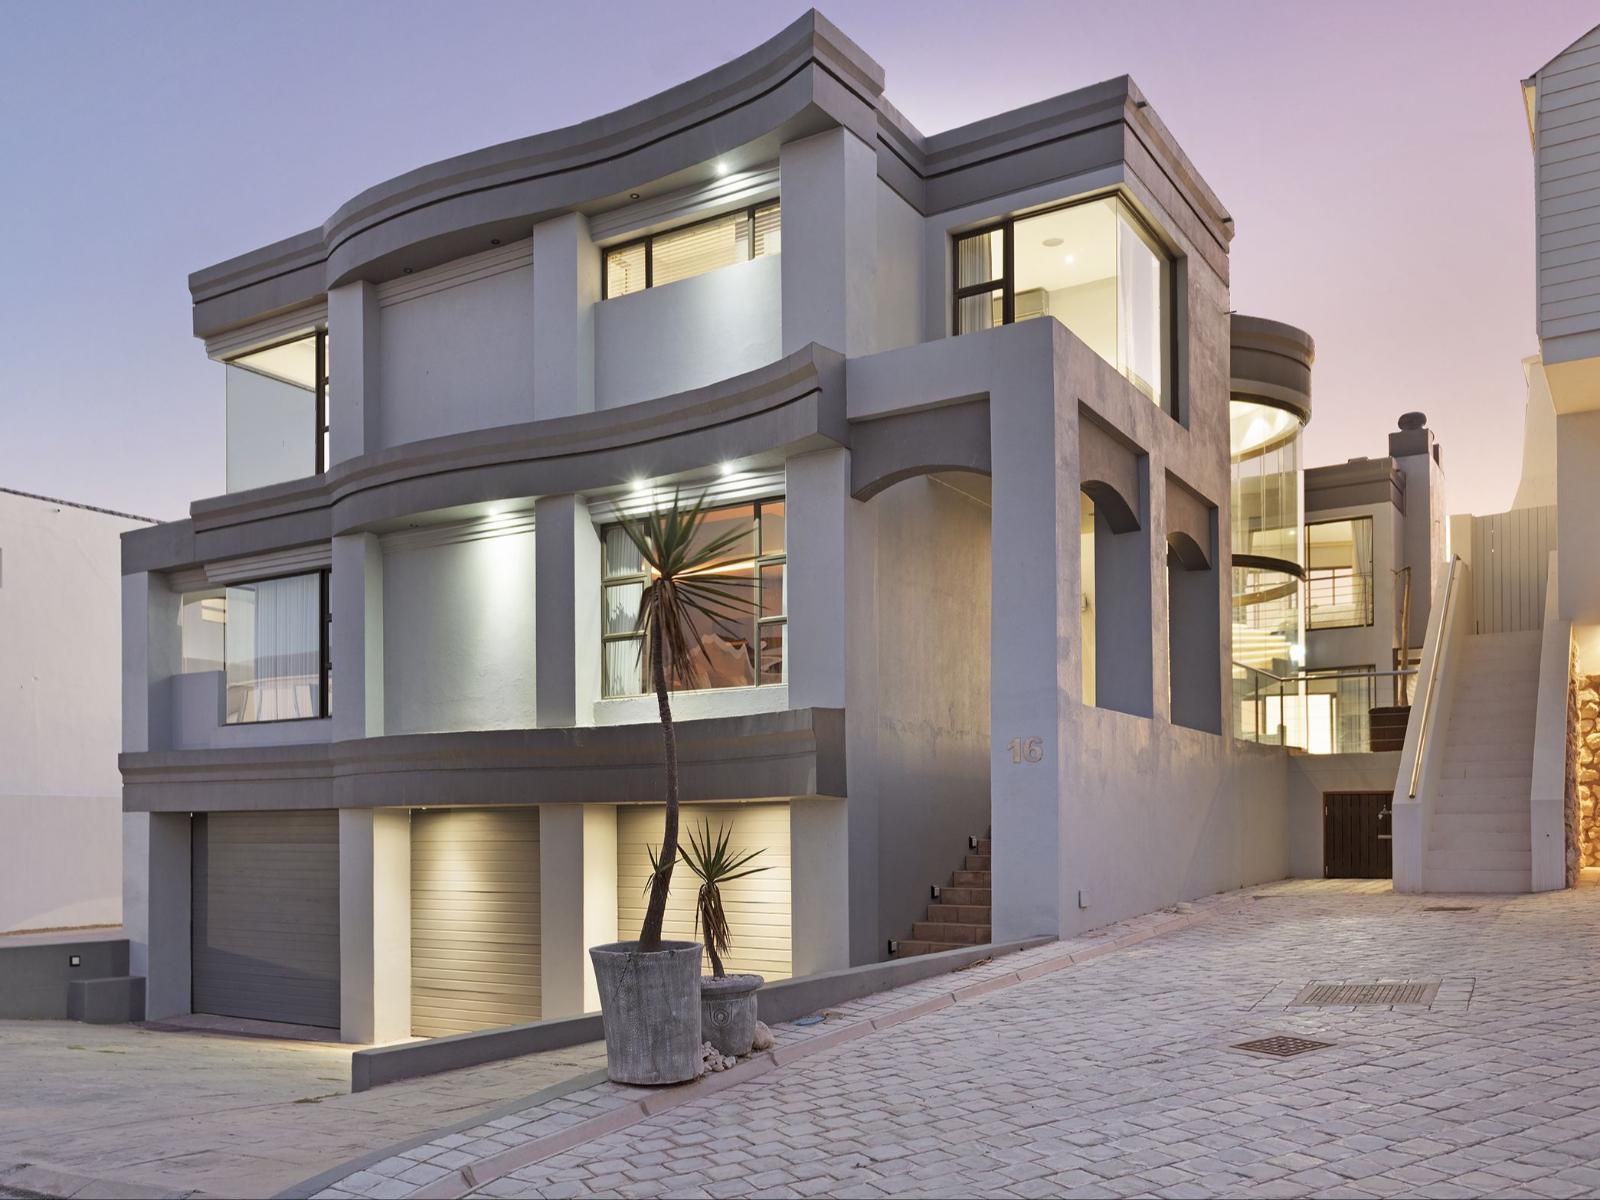 Tenos On Calypso 16 By Hostagents Calypso Beach Langebaan Western Cape South Africa Building, Architecture, House